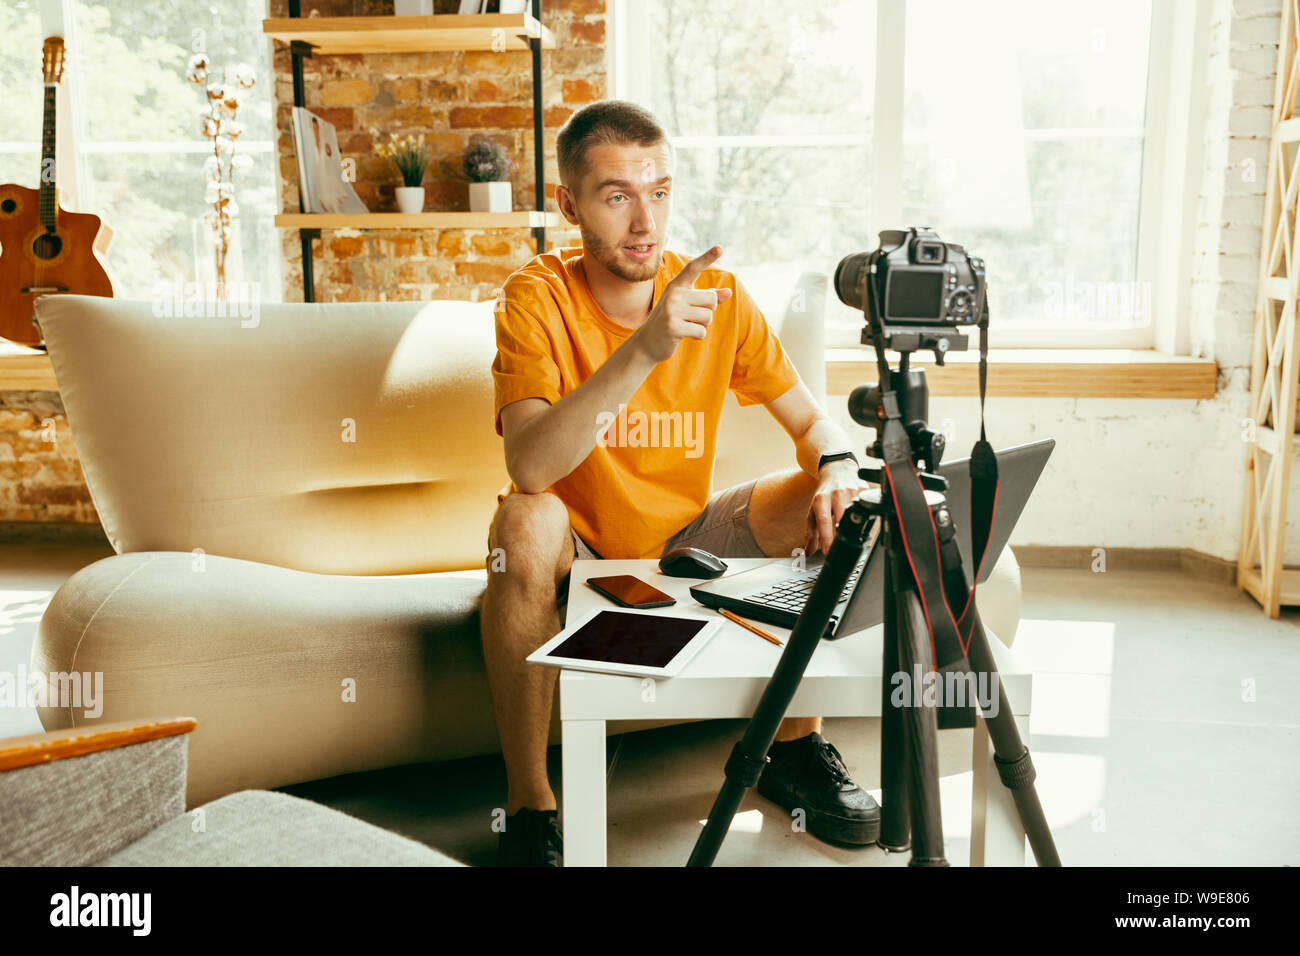 Young caucasian male blogger with professional camera recording video review of gadgets at home. Blogging, videoblog, vlogging. Man making vlog or live stream about photo or technical novelty. Stock Photo